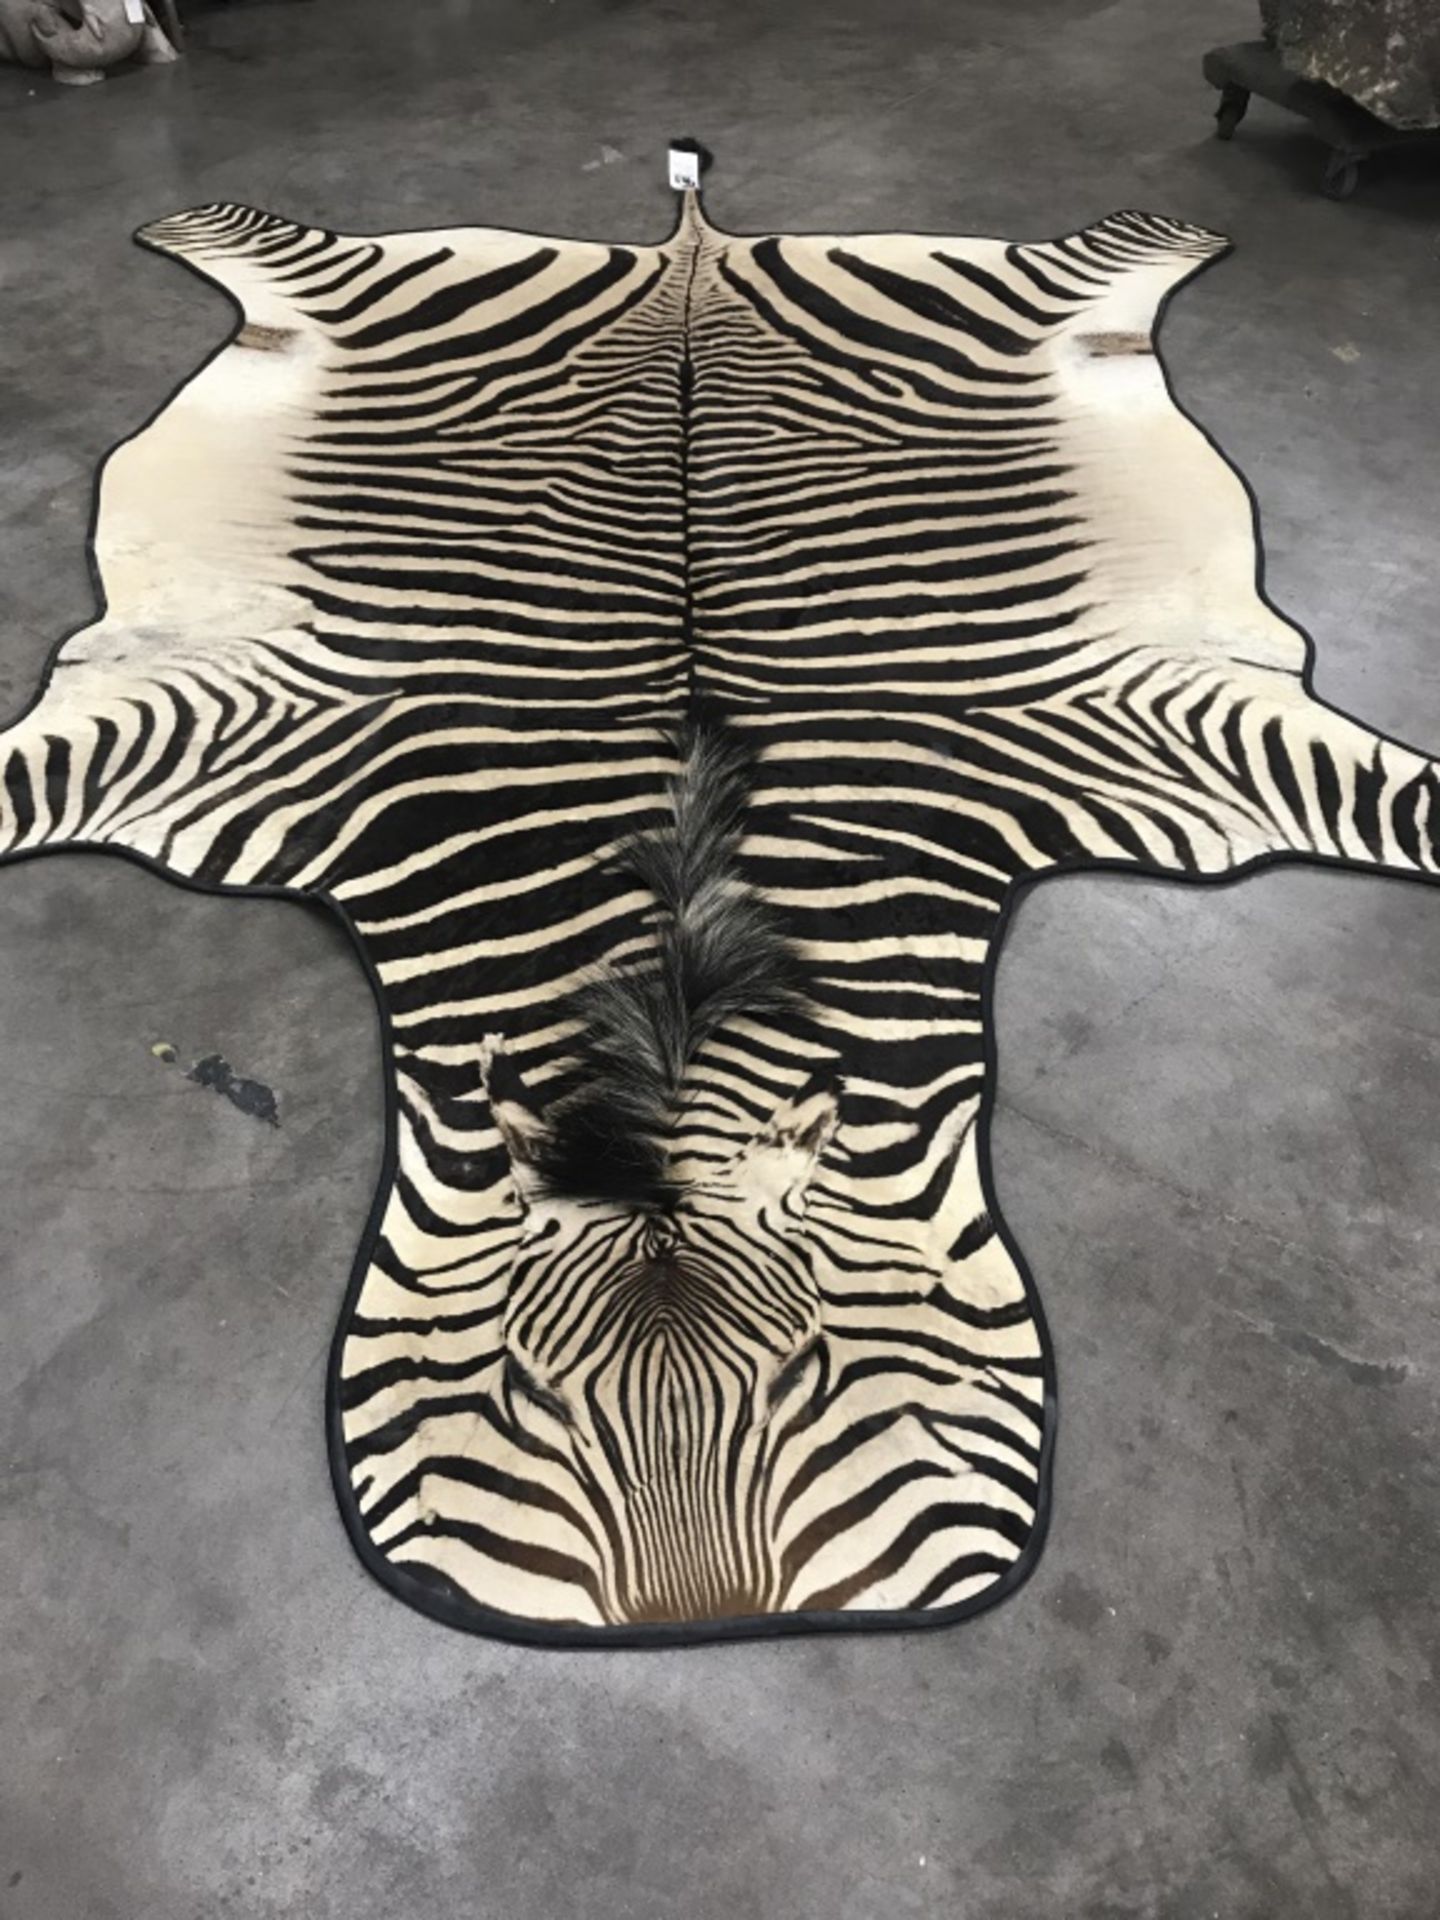 Very Nice Zebra Rug (TX Res. Only) - Image 2 of 13